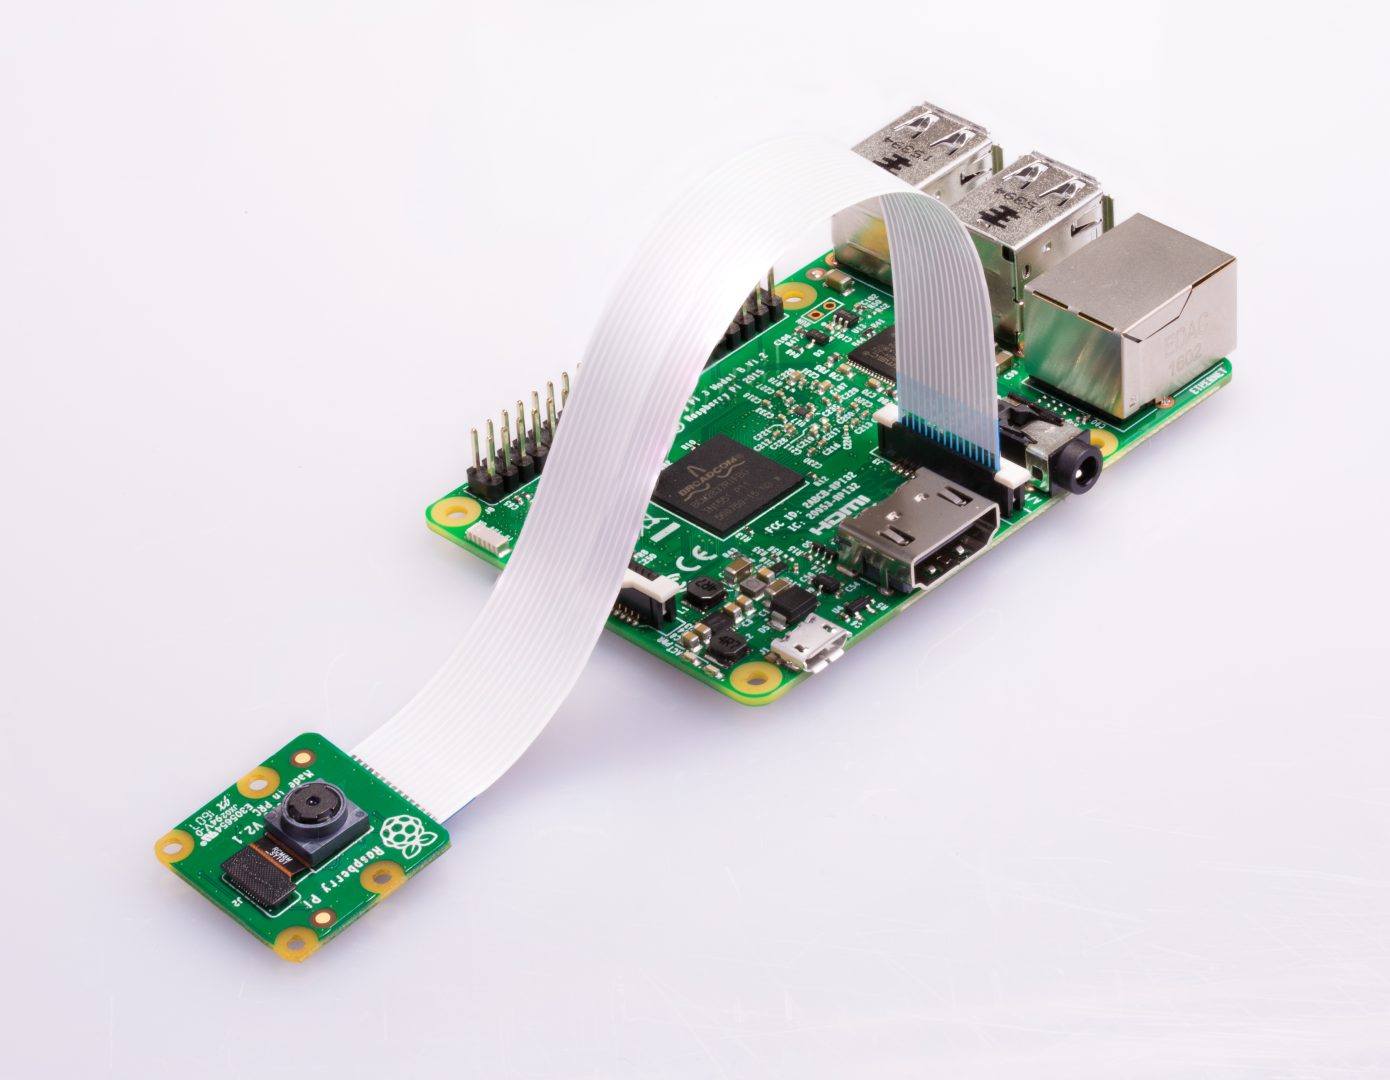 For this project I use a Raspbbery Pi in combination with a Pi Camera.